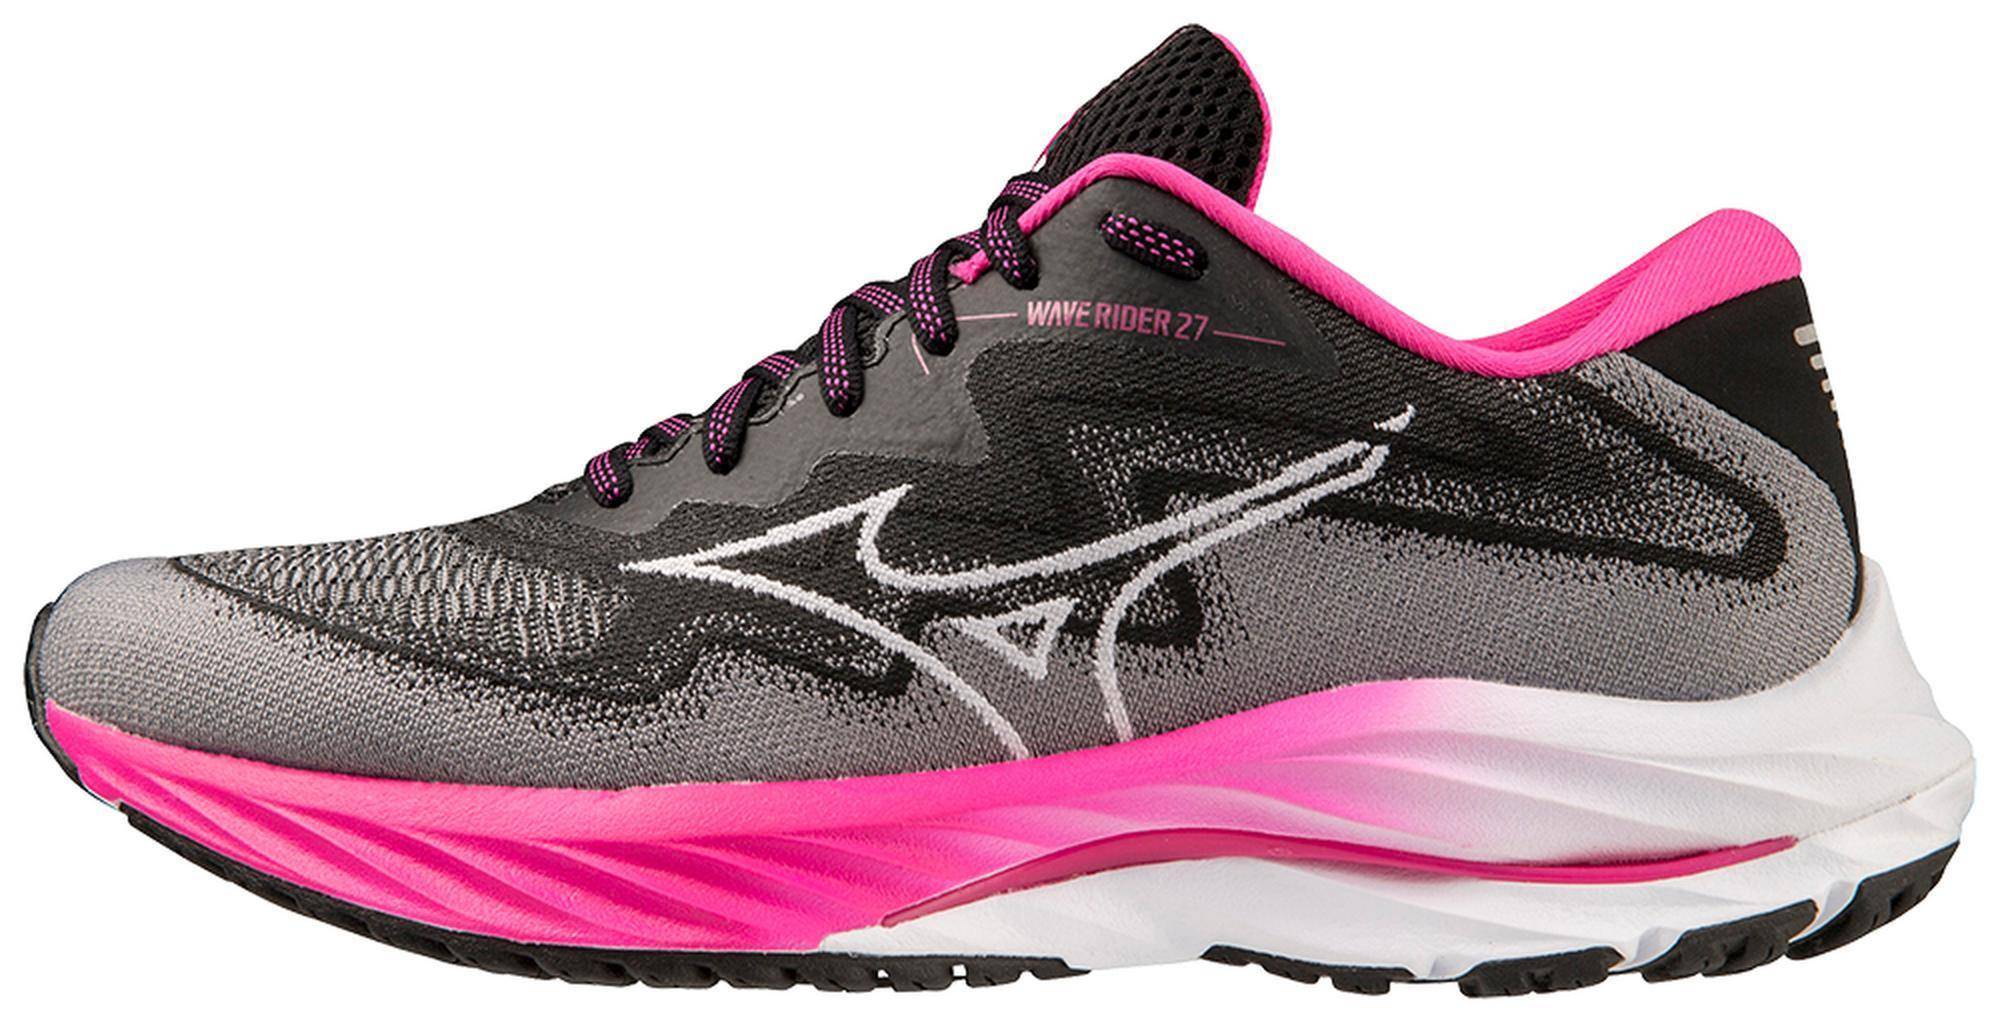 Women’s Project Zero Wave Rider 27 Running Shoes - The Shoe Collective